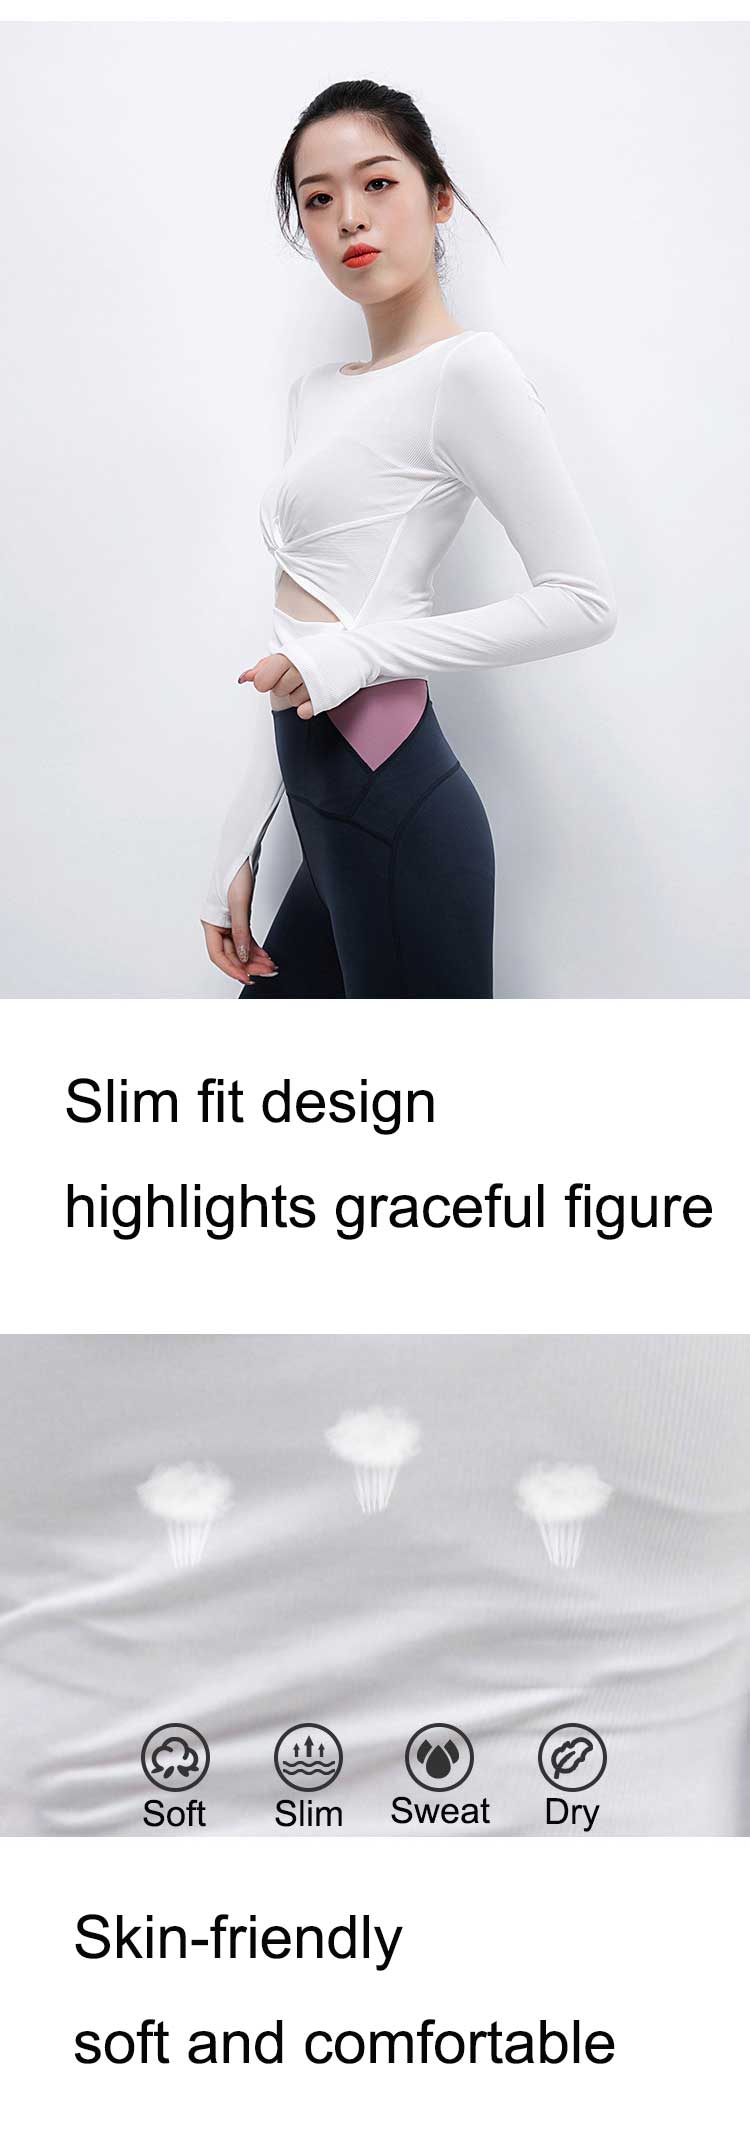 Long-sleeve-workout-top-womens-has-a-slim-design-that-highlights-the-graceful-figure-and-shows-it-off